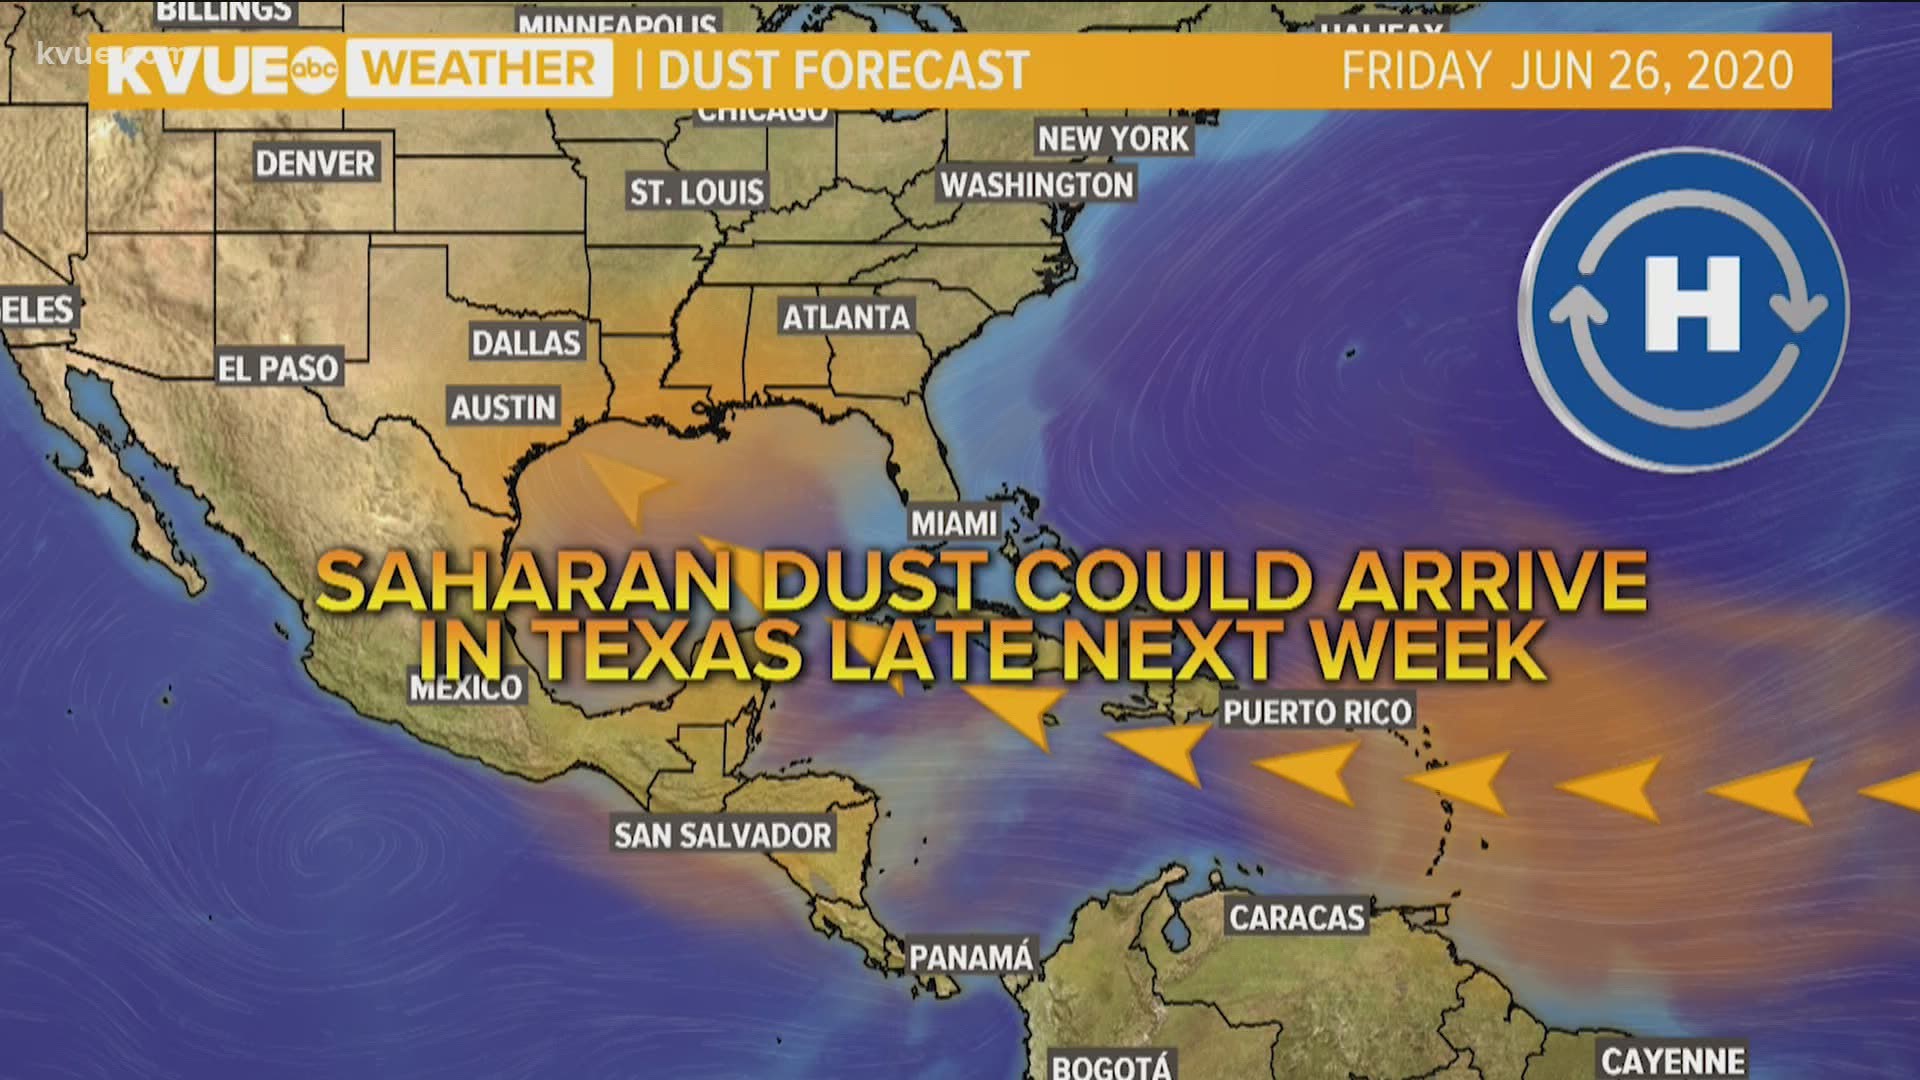 A strong jet stream is bringing a large cloud of dry dust from the Sahara Desert to the Atlantic Ocean. Here's how Texas will be impacted.